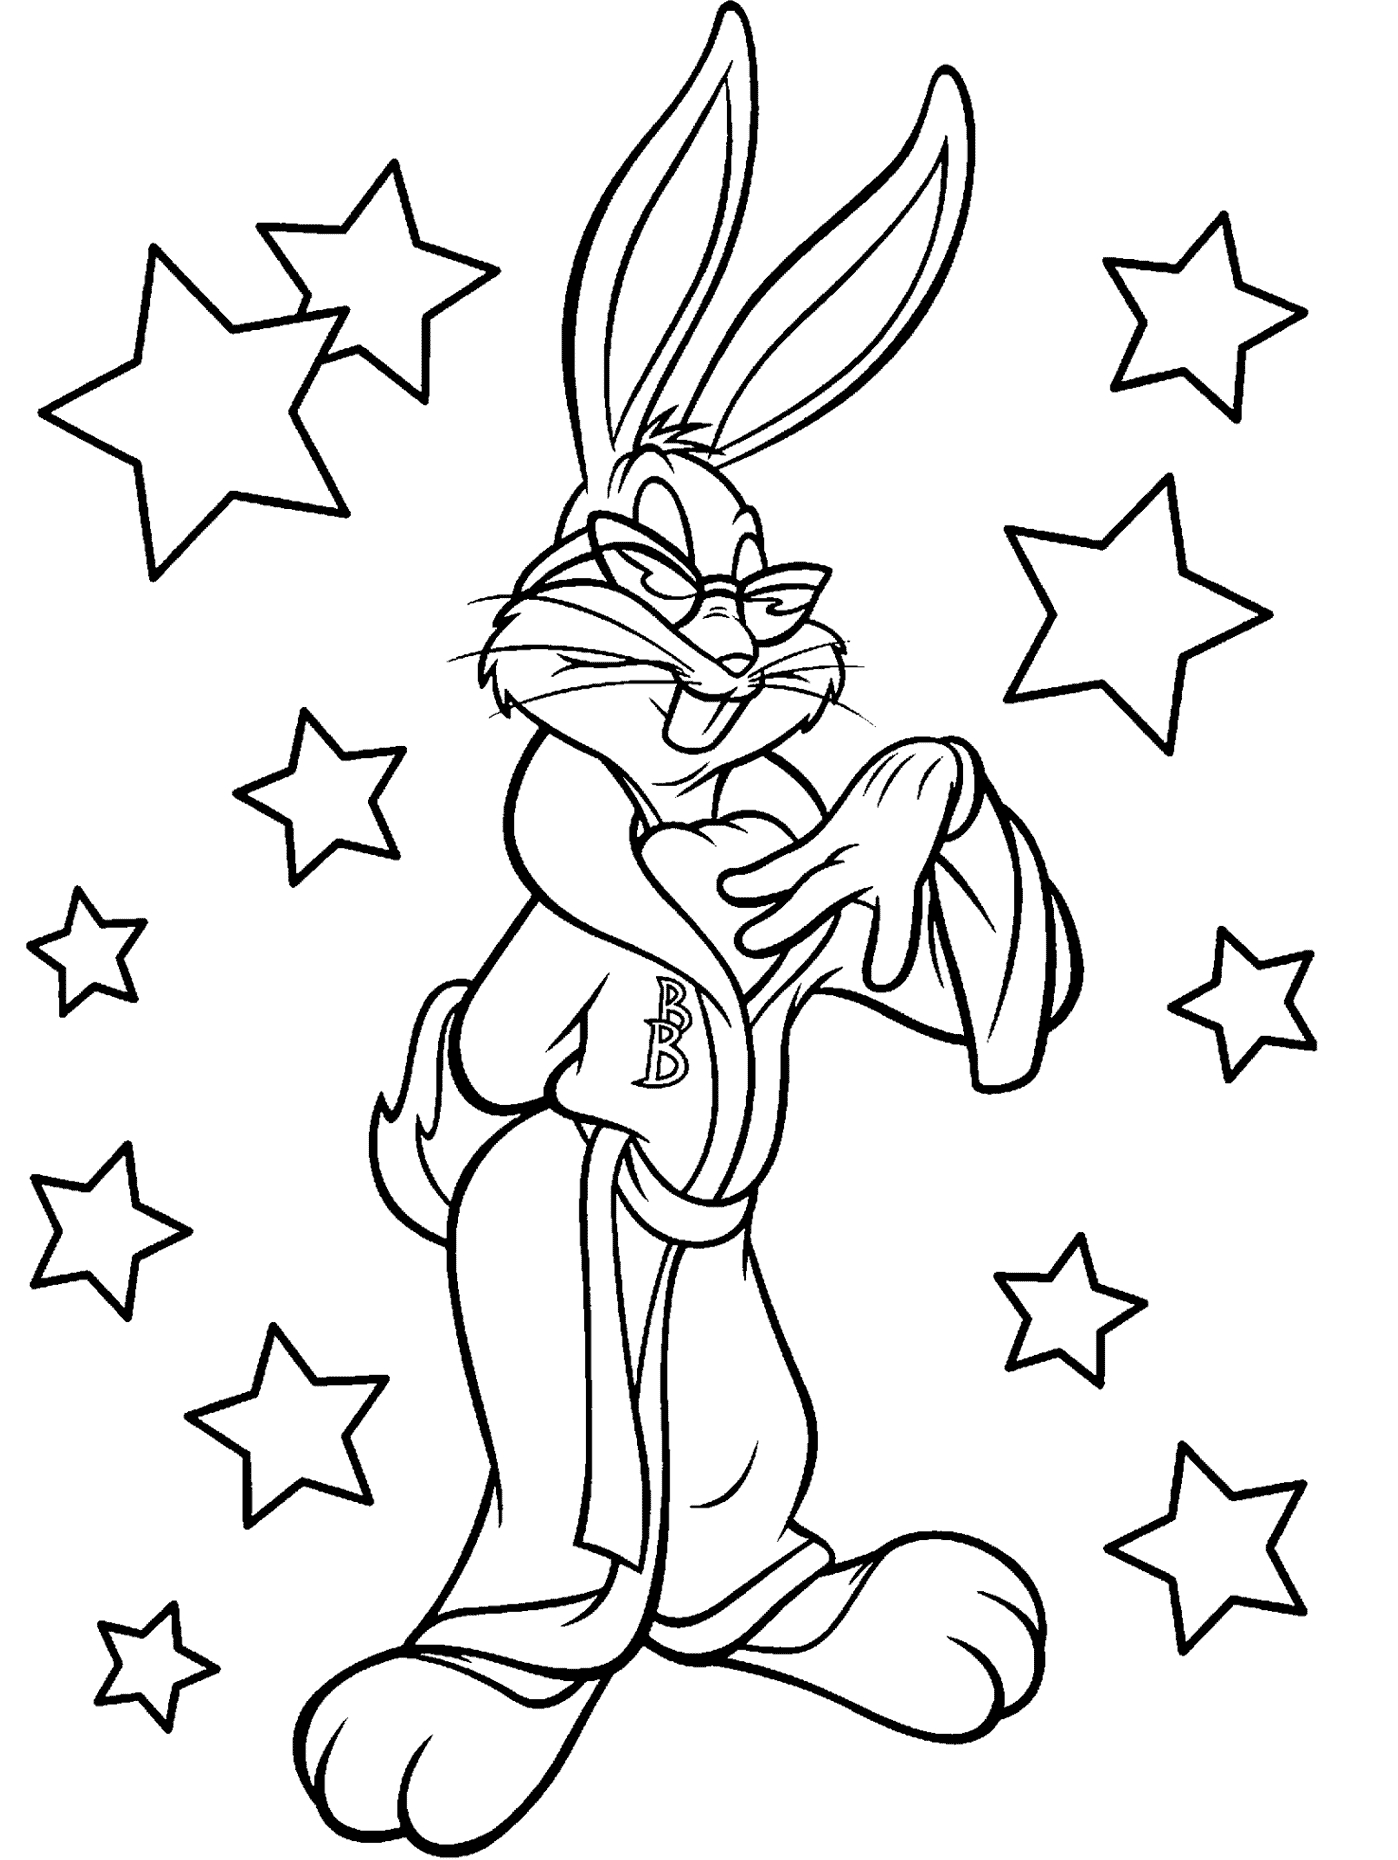 Elmer Fudd Coloring Pages Bugs Bunny Coloring Page Looney Tunes Spot Coloring Pages